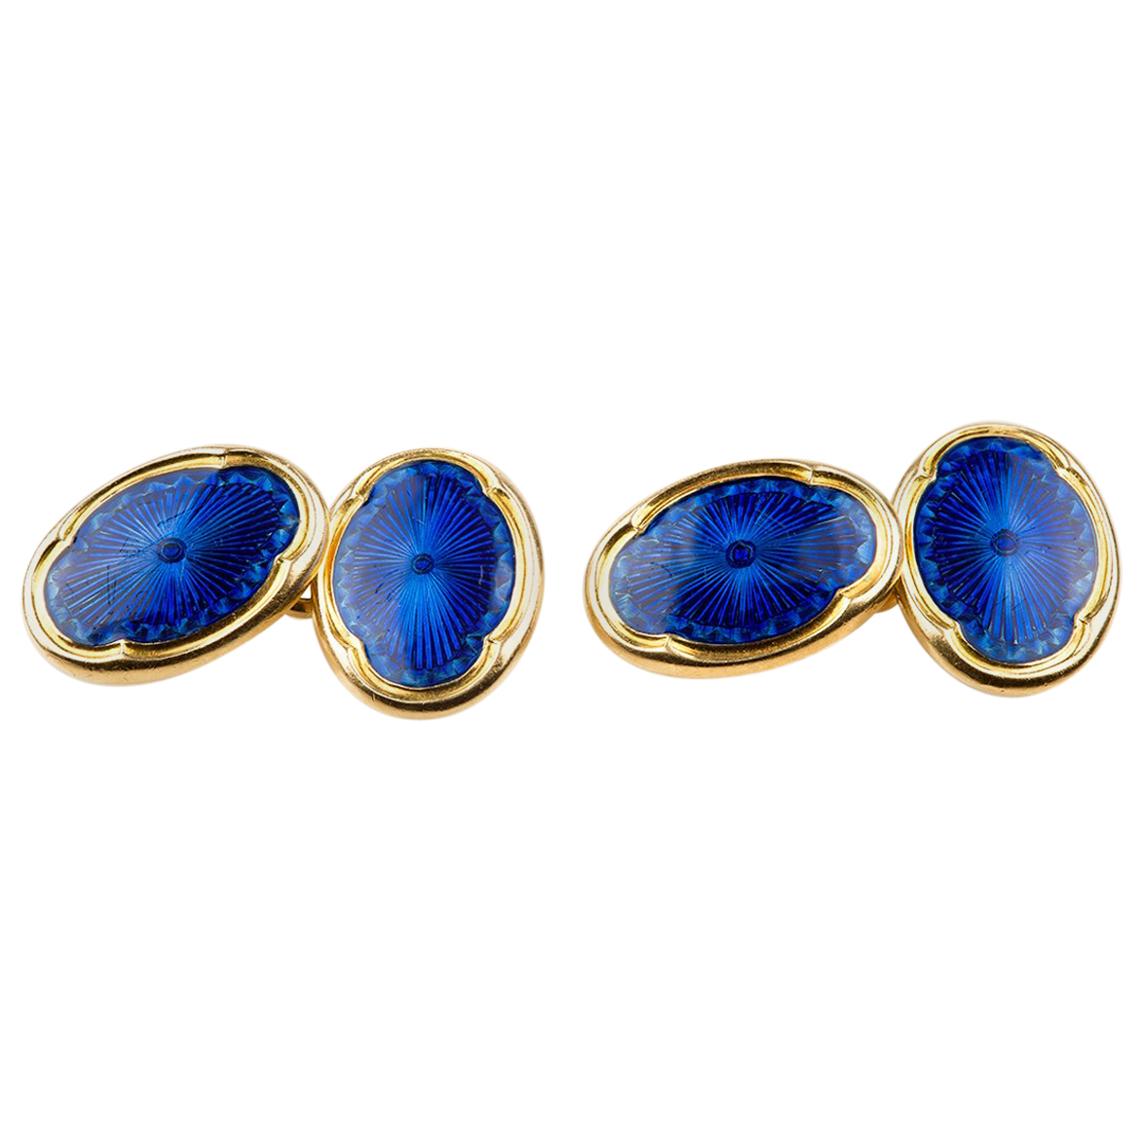 Deakin & Francis Cufflinks in 18 Carat Gold and Blue Enamel, English 1909 For Sale